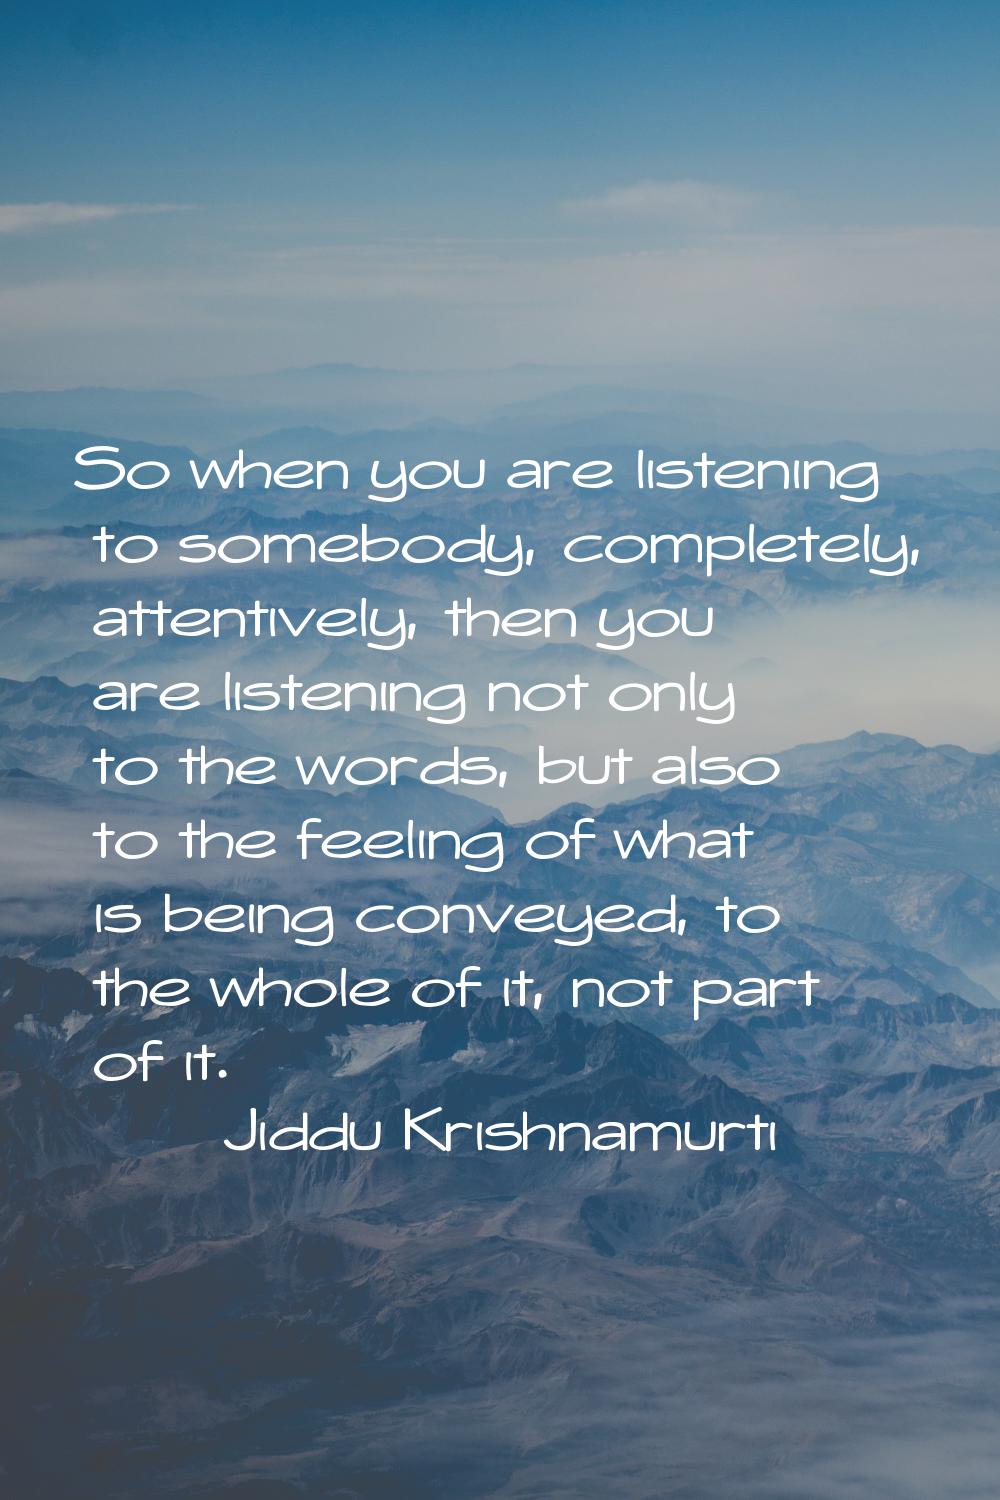 So when you are listening to somebody, completely, attentively, then you are listening not only to 